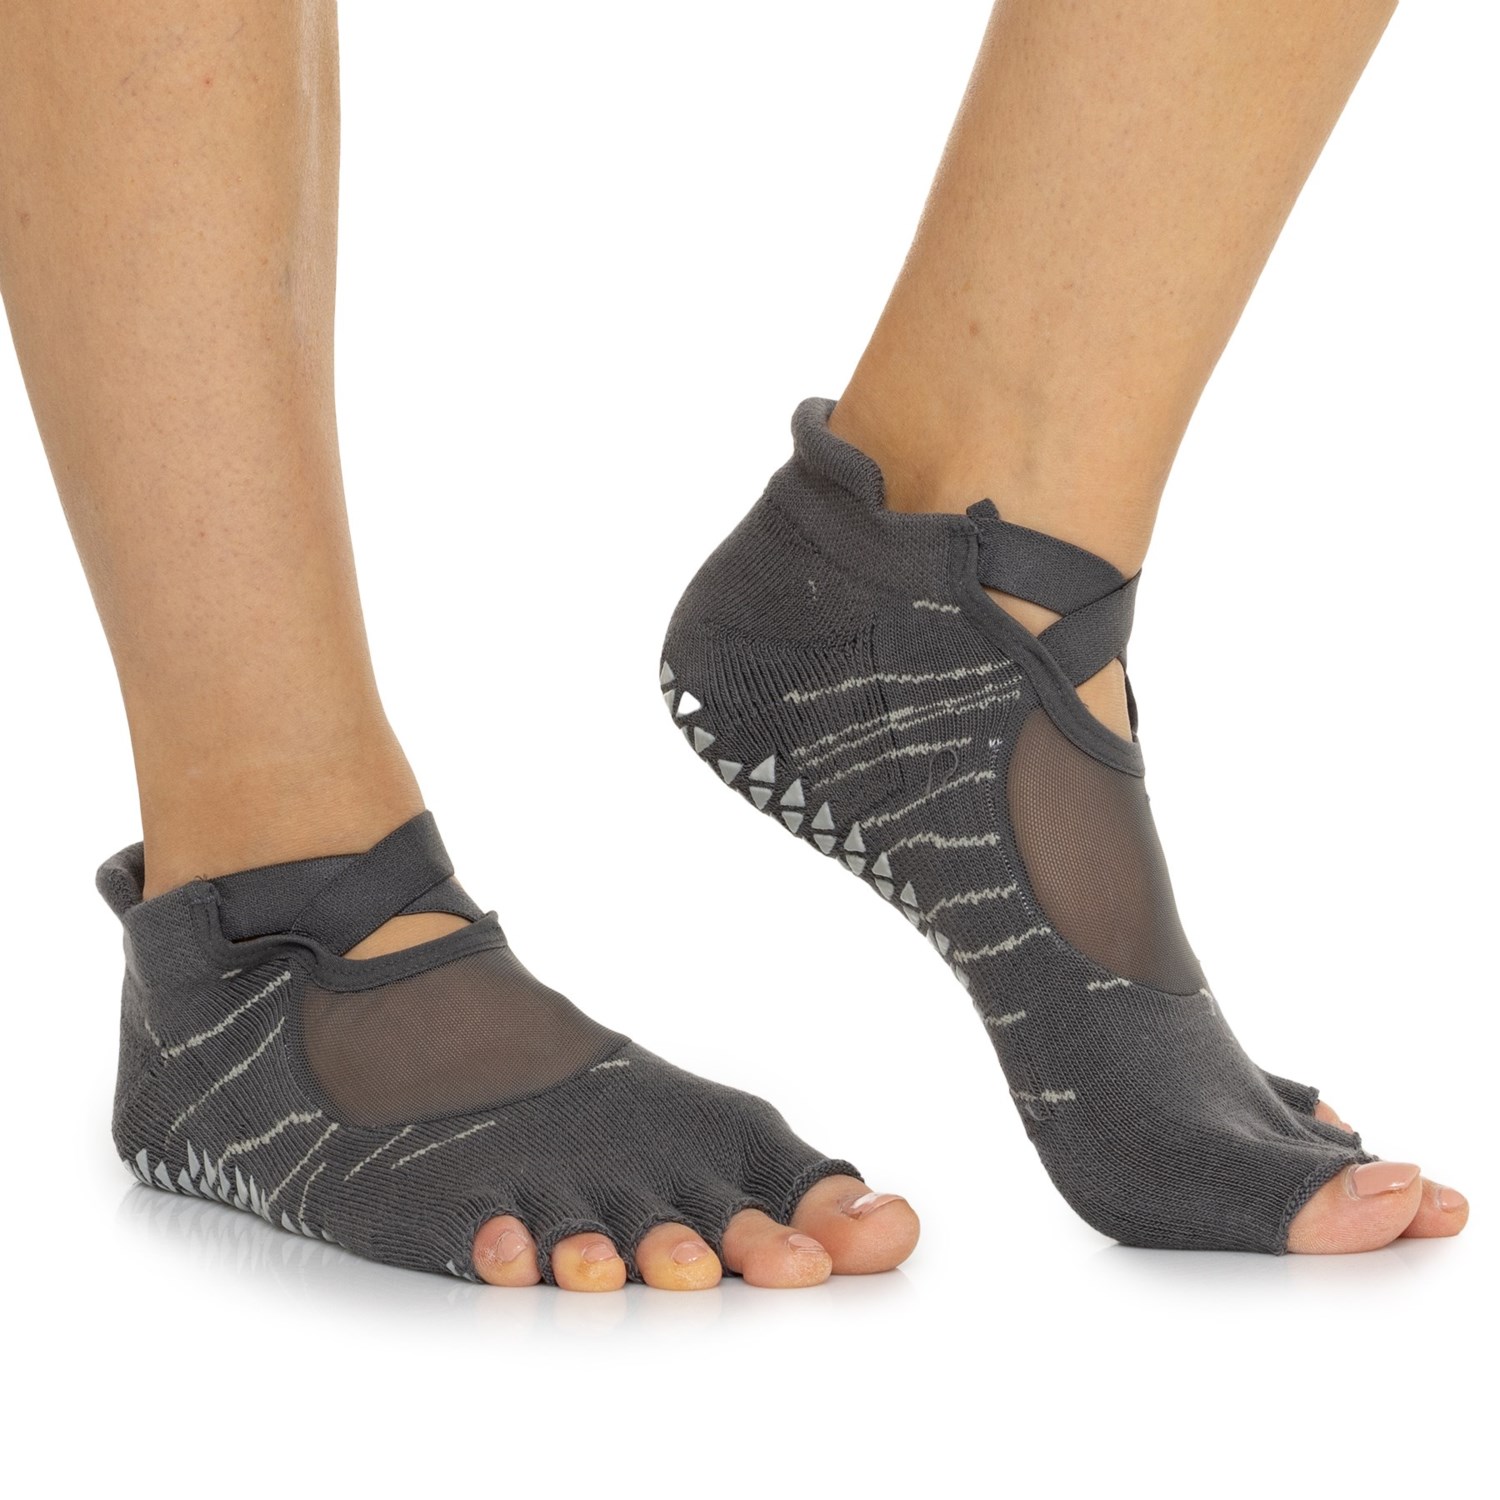 Toeless Grip Socks for Yoga  Shop Online - SOCK IT AND CO.®